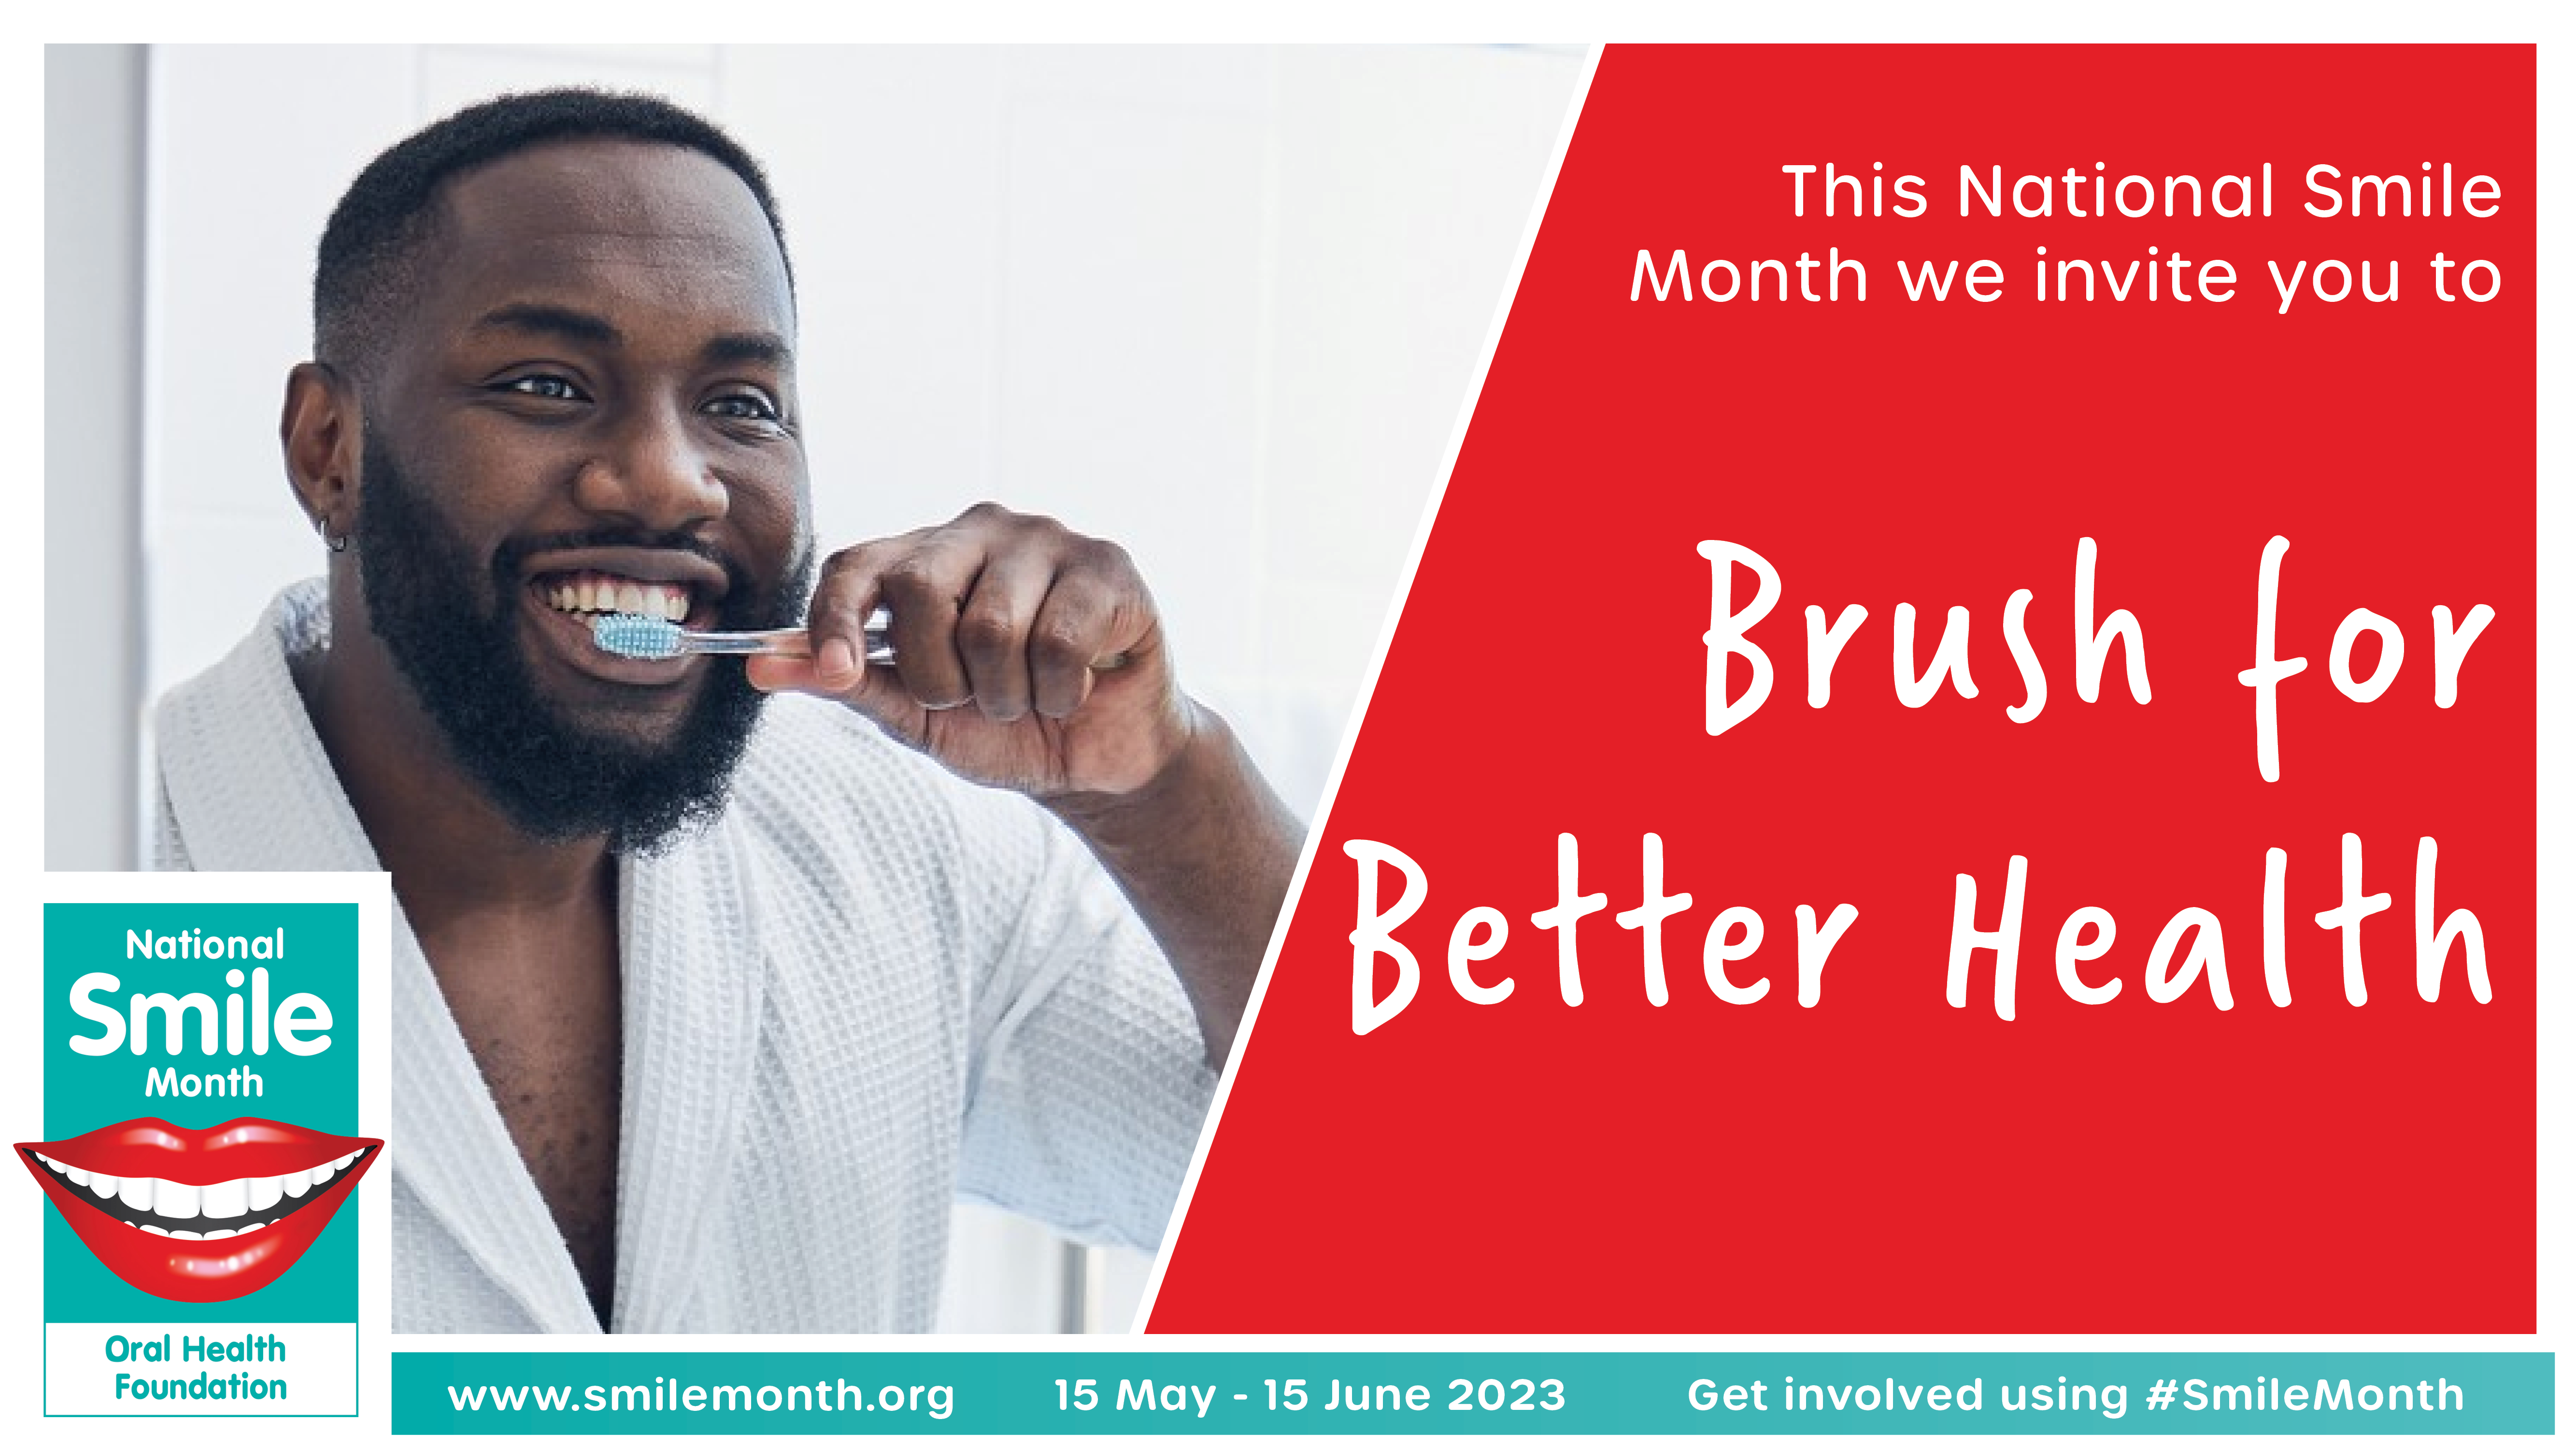 Brush for Better Health - campaign image from Oral Health Foundation